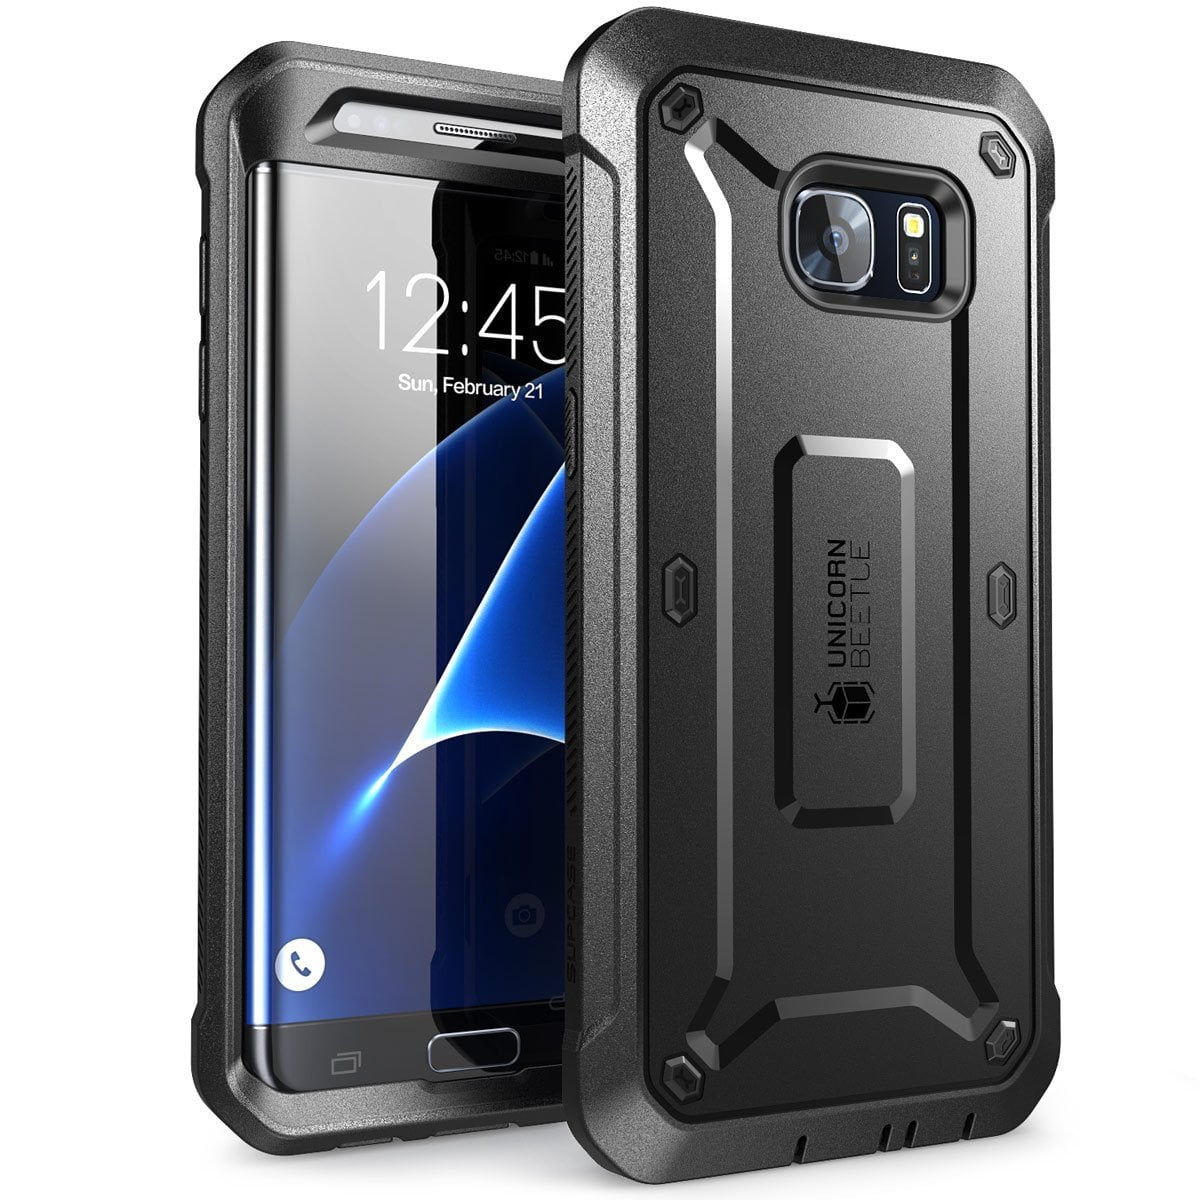 SUPCASE Full-Body Rugged Holster Case with Built-in Screen Protector for Samsung Galaxy S7 Retail Package Unicorn Beetle PRO Series White/Gray 2016 Release Galaxy S7 Case